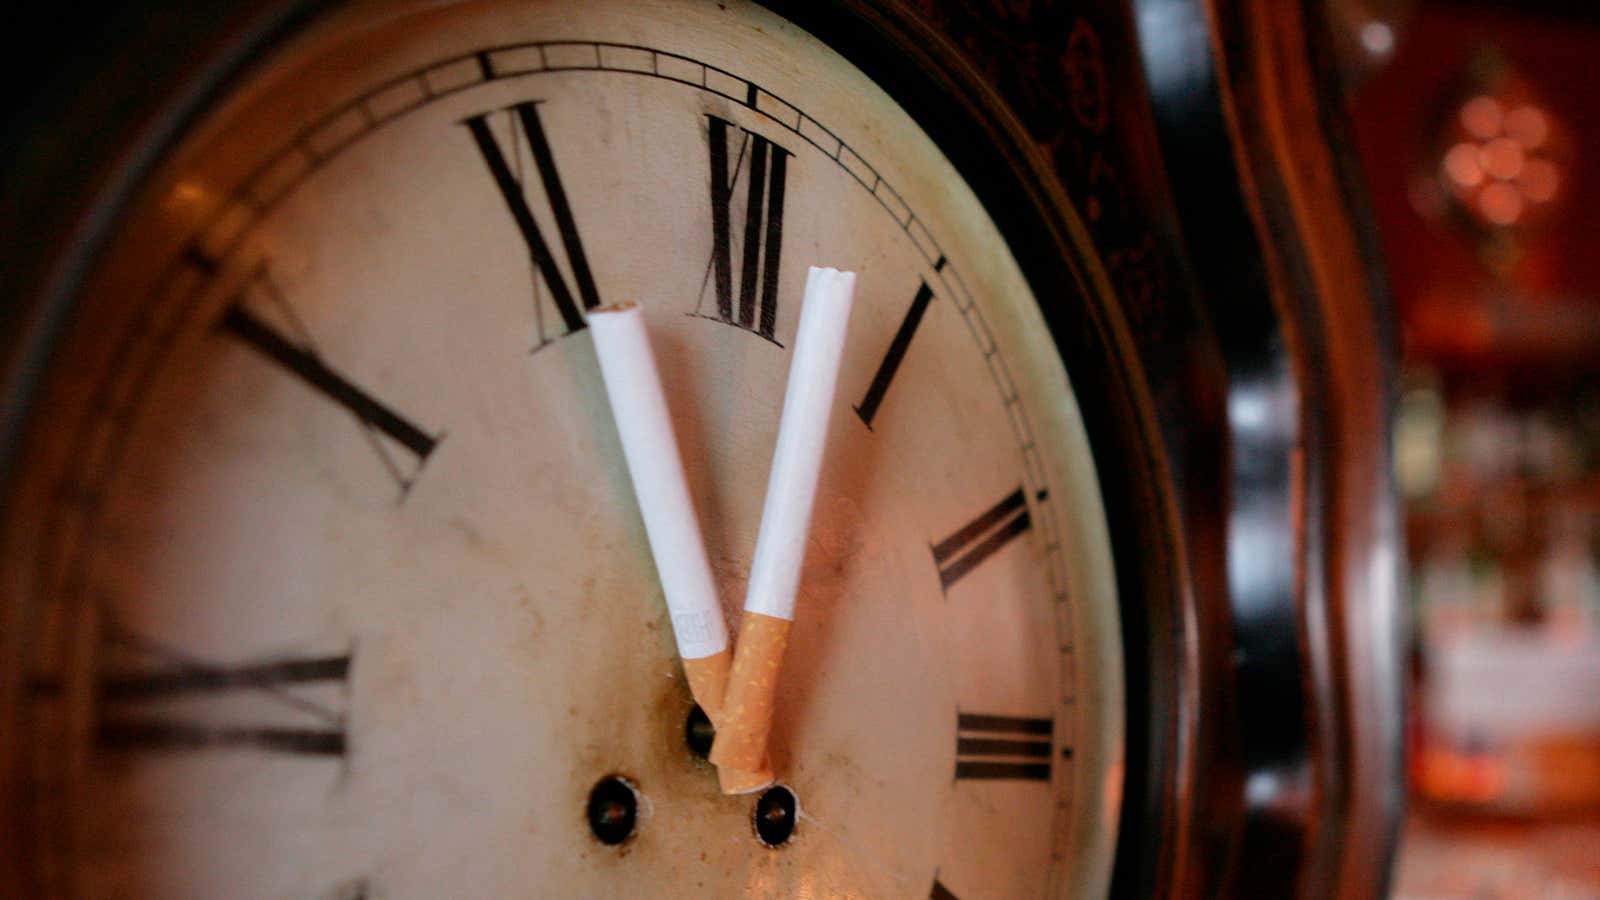 The clock is ticking on cancer sticks.